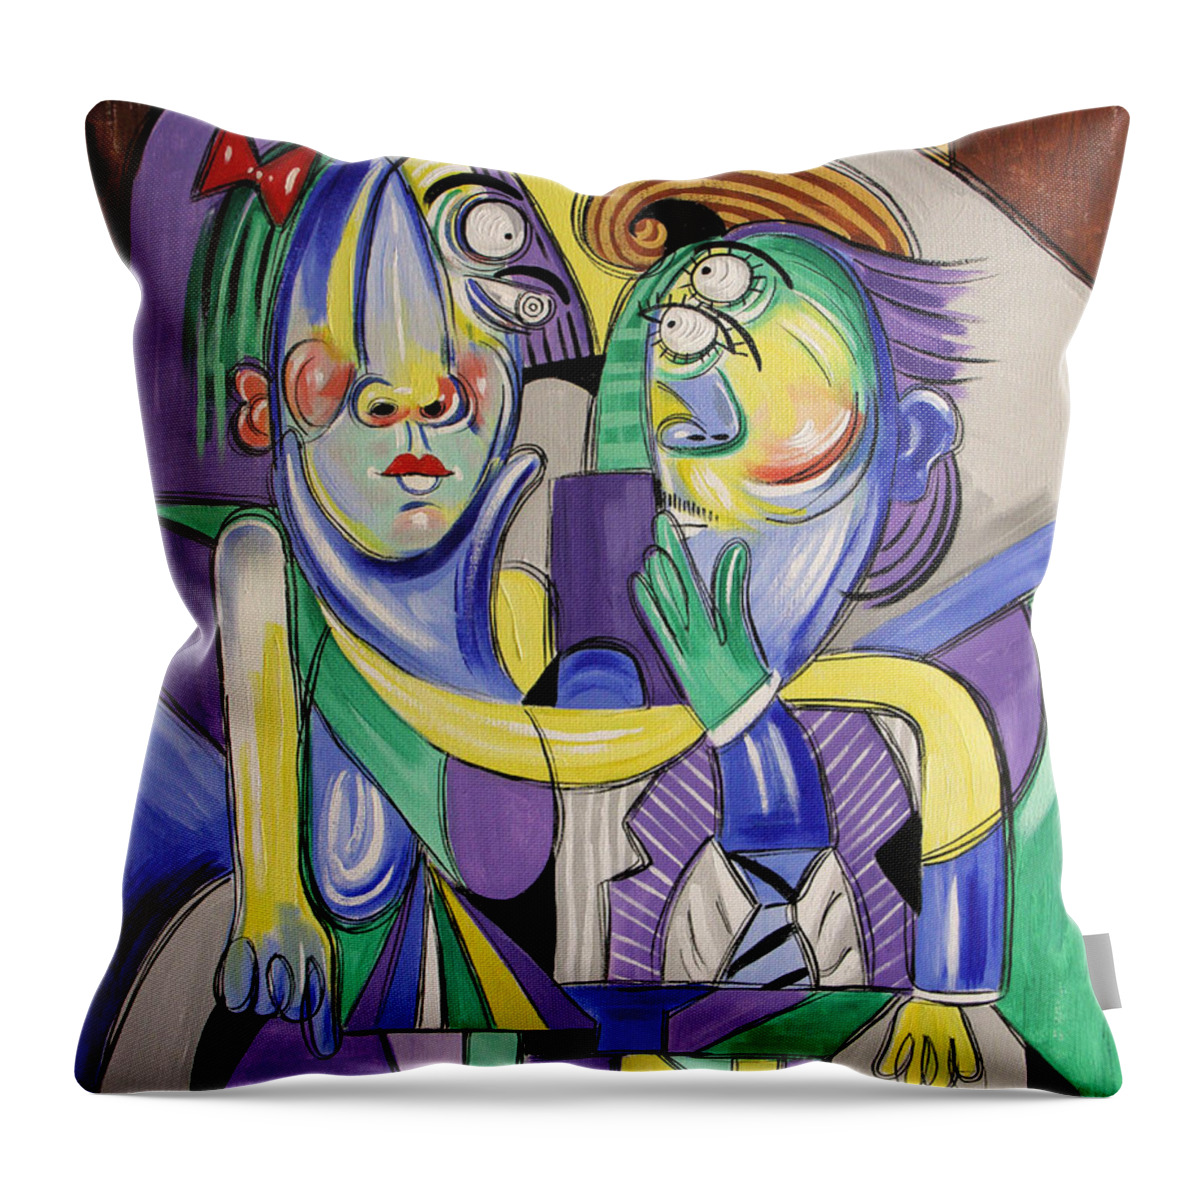 Fluid Throw Pillow featuring the painting Fluid by Anthony Falbo